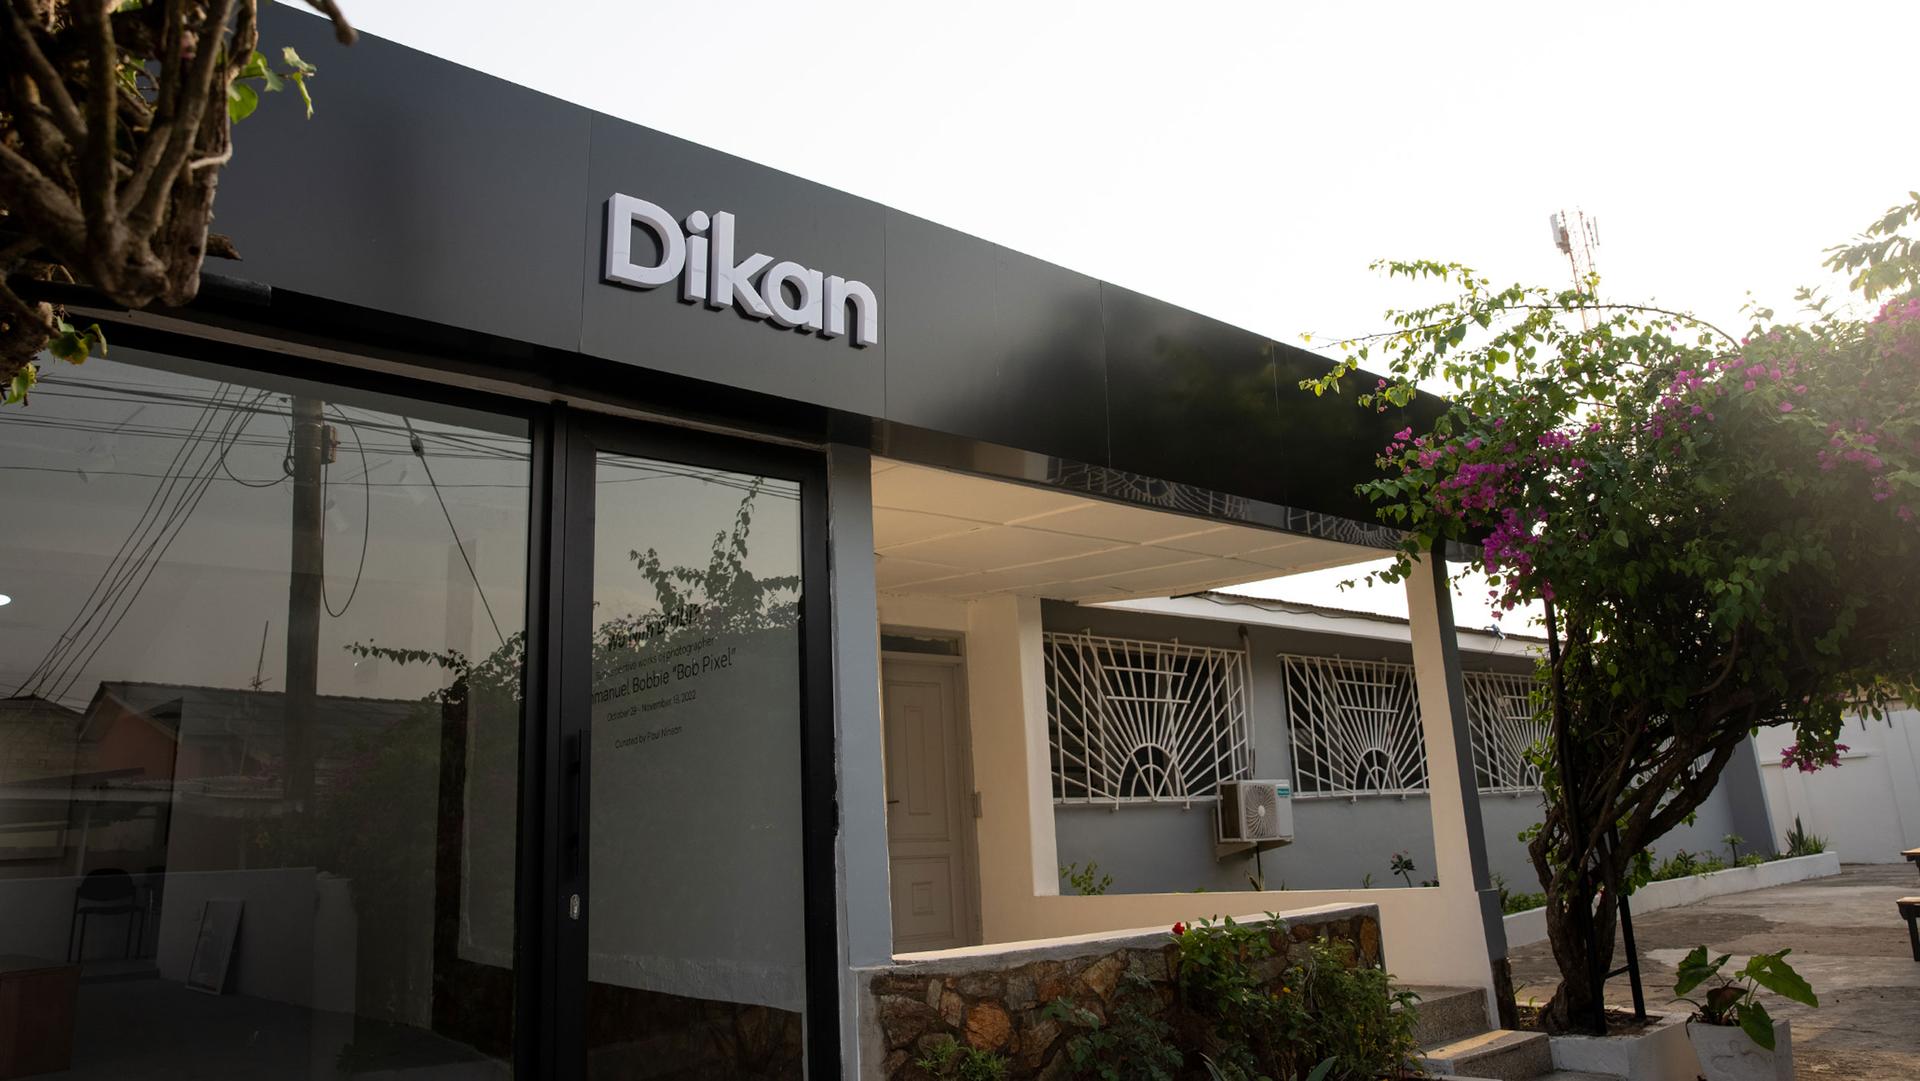 The exterior of the newly opened Dikan Center for photography in Accra, Ghana.